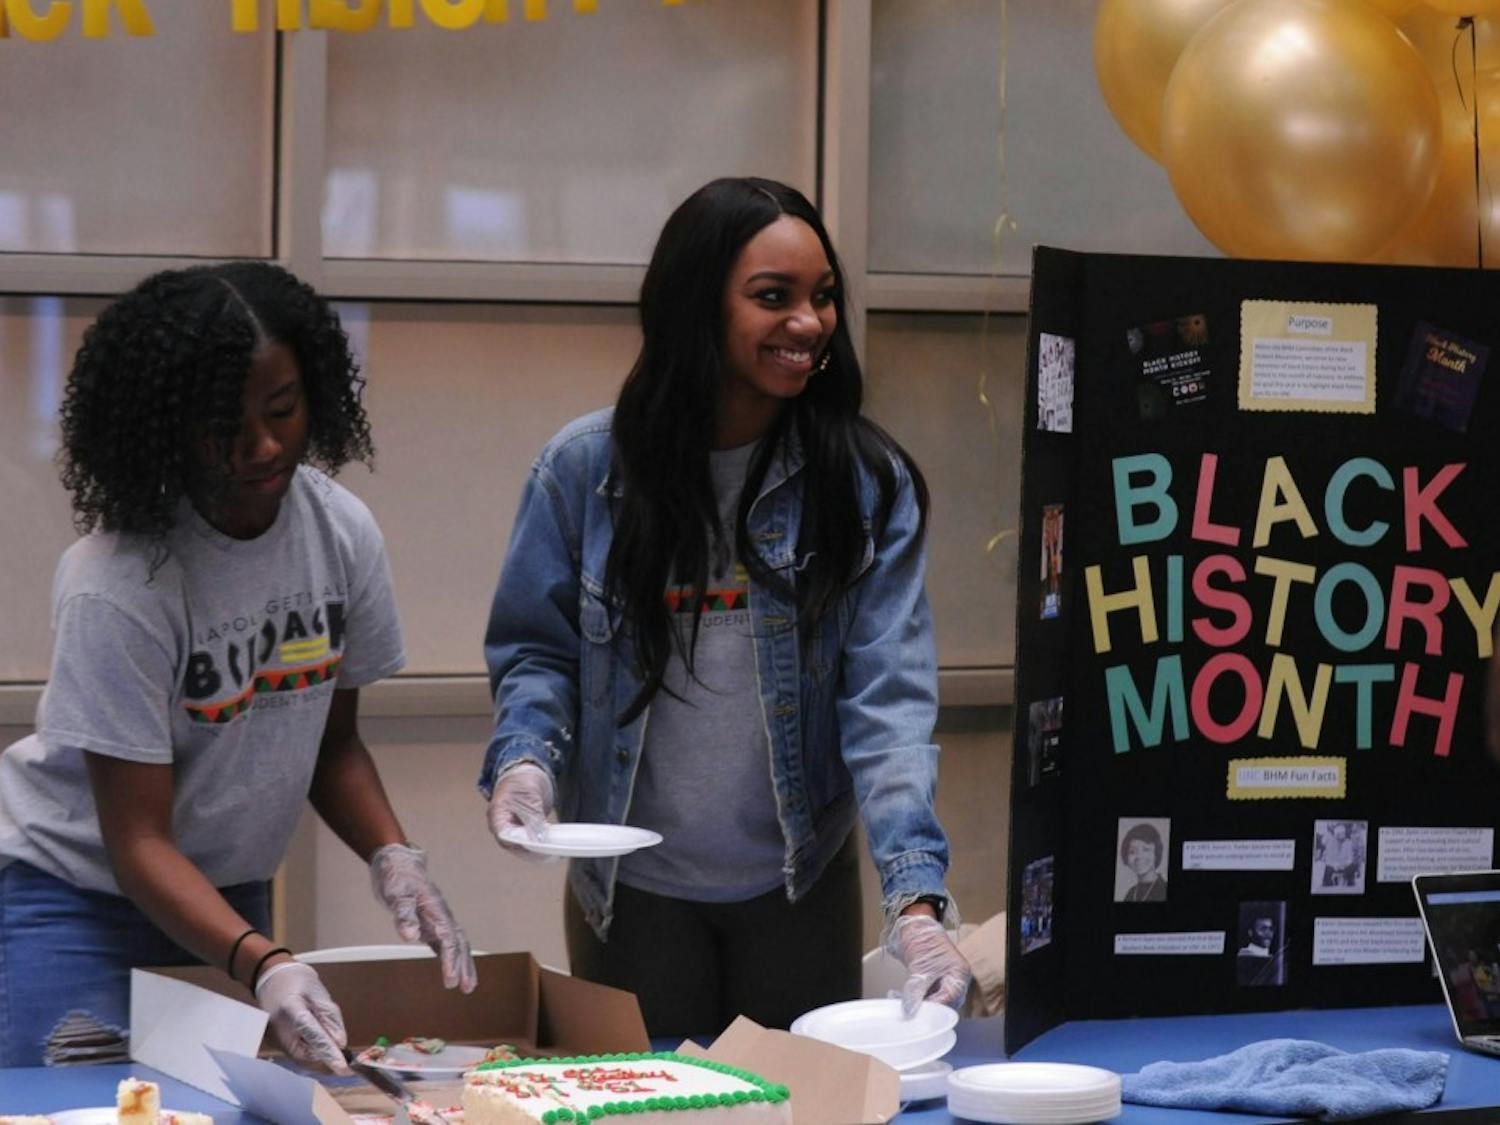 UNC sophomores Jasmine Marshall and Faith Jeffers help the Black Student Movement kickoff Black History Month in the Carolina Union on Friday, Feb. 1, 2019.